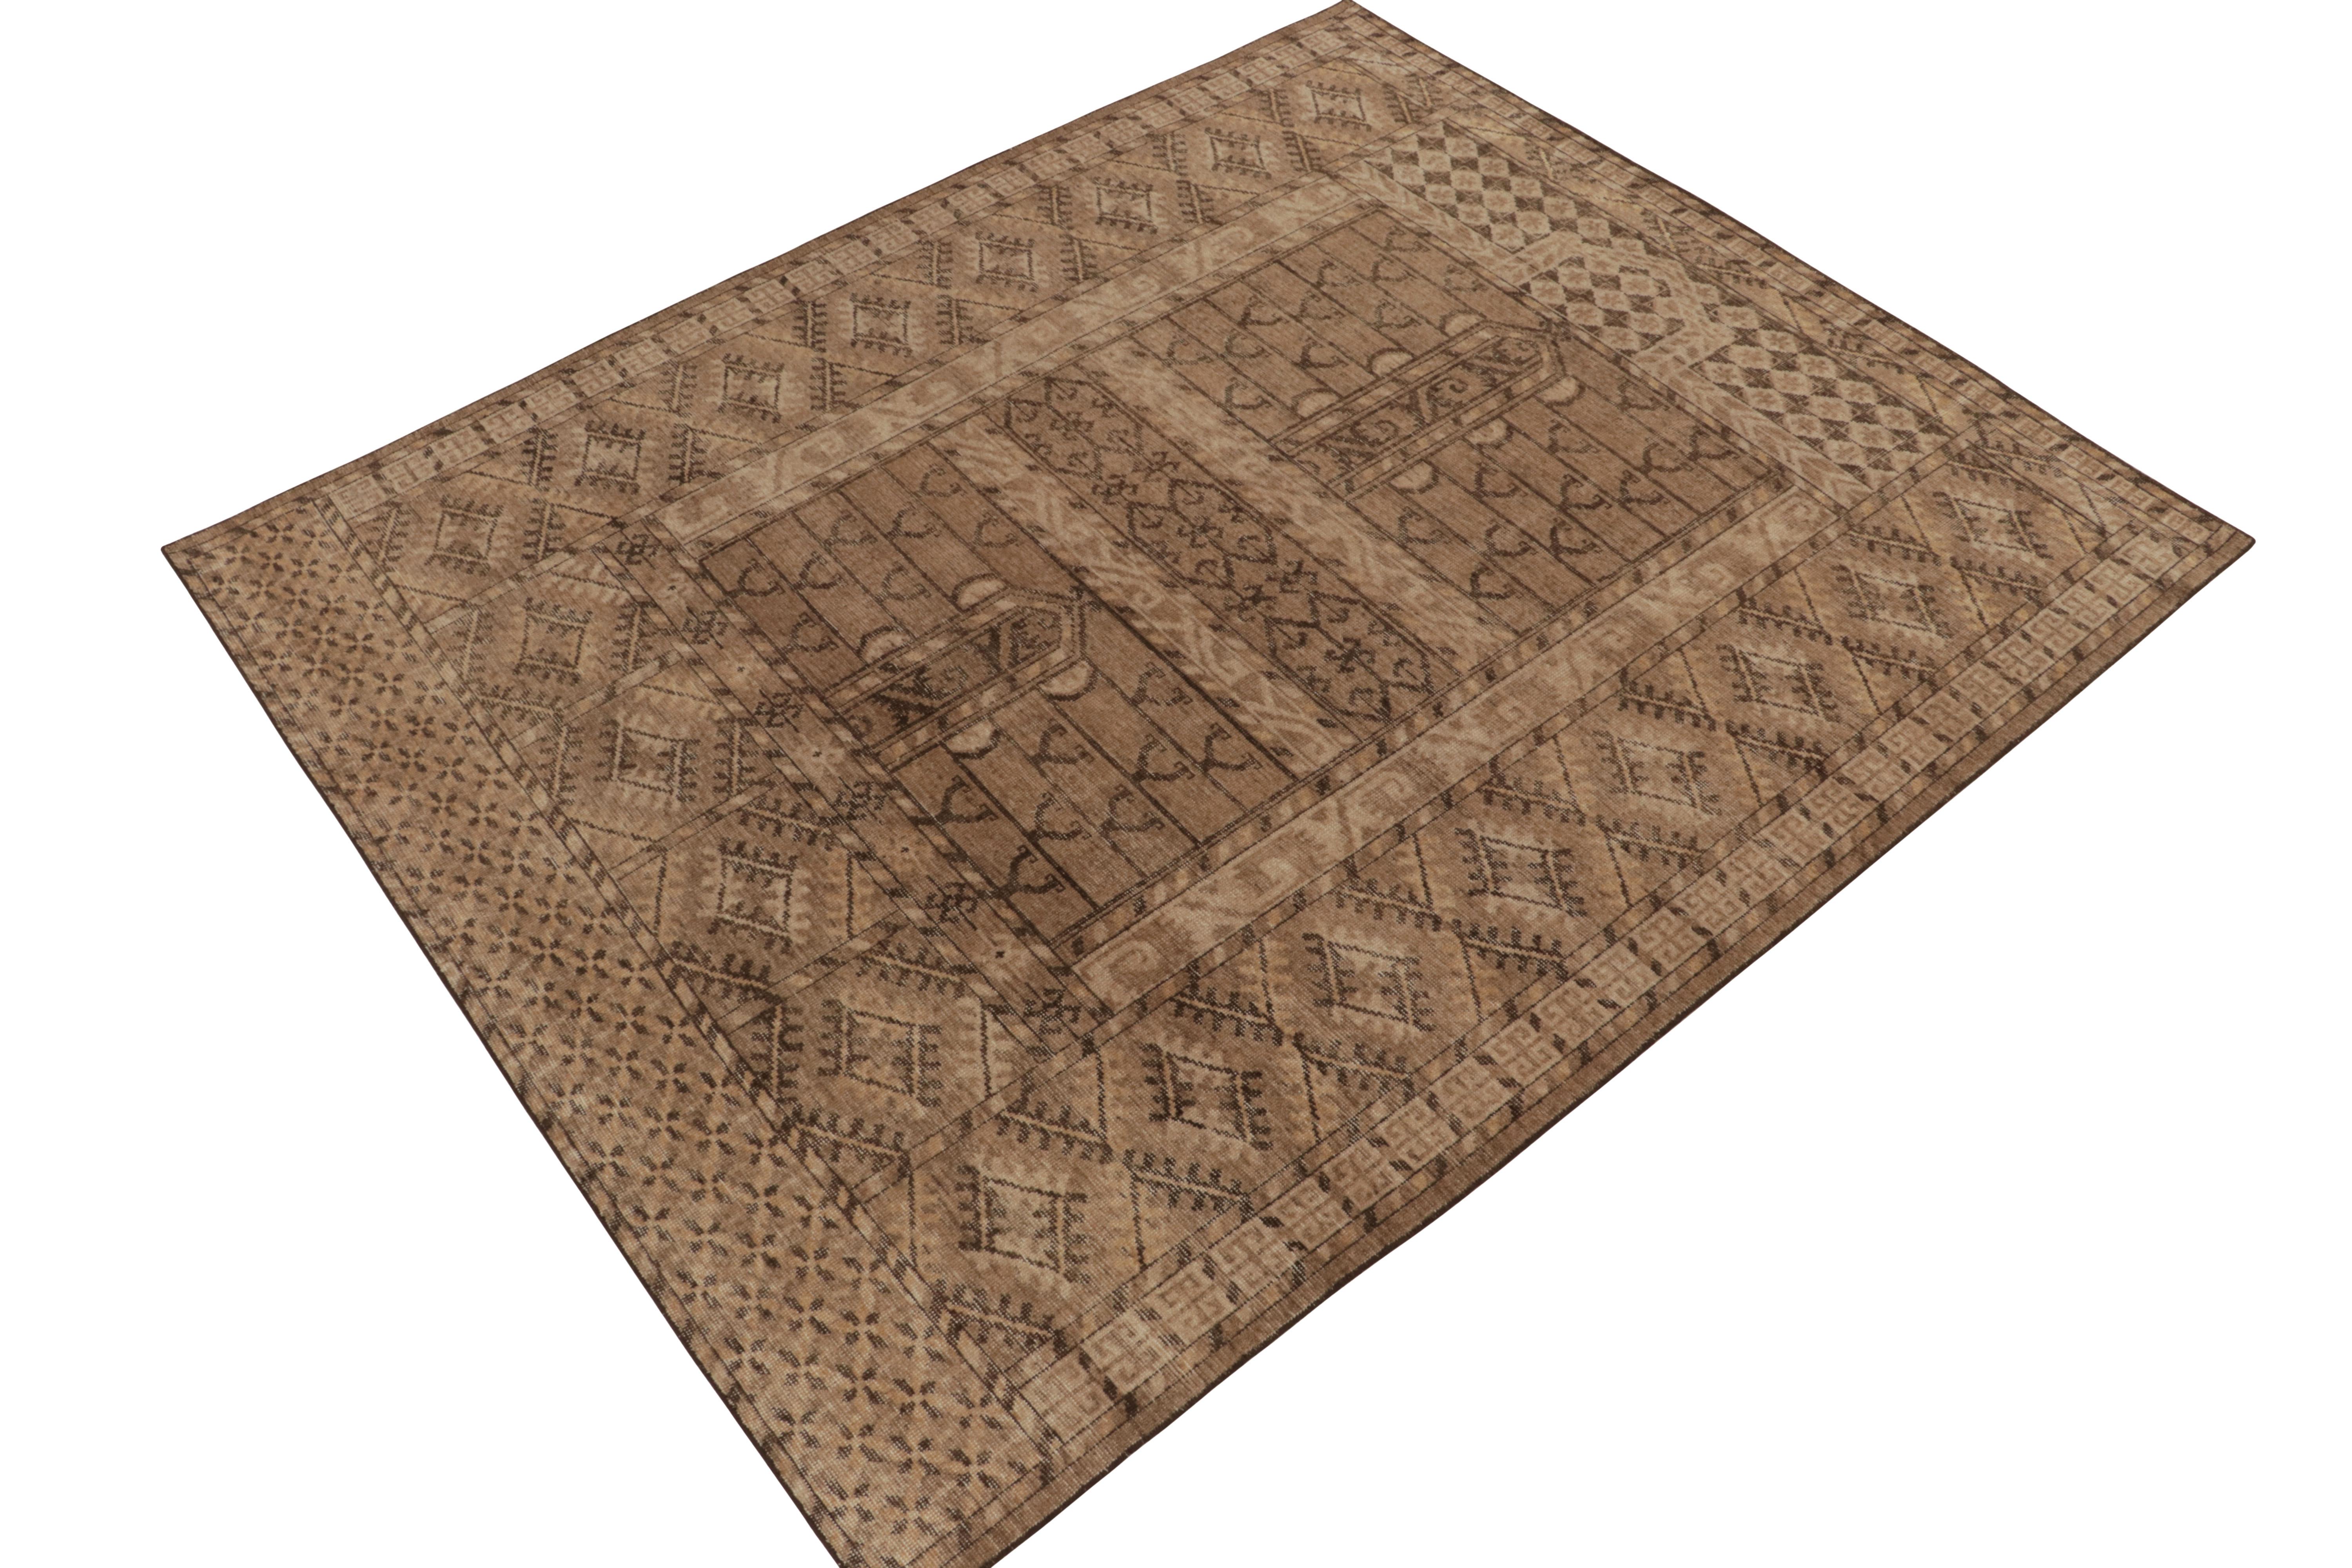 An 8x10 hand-knotted wool rug from Rug & Kilim’s Homage Collection. 

This creation recaptures tribal aesthetics in a modern fashion with soft tones of beige & brown naturally complementing the tribal geometry. This time-honored look of symmetry